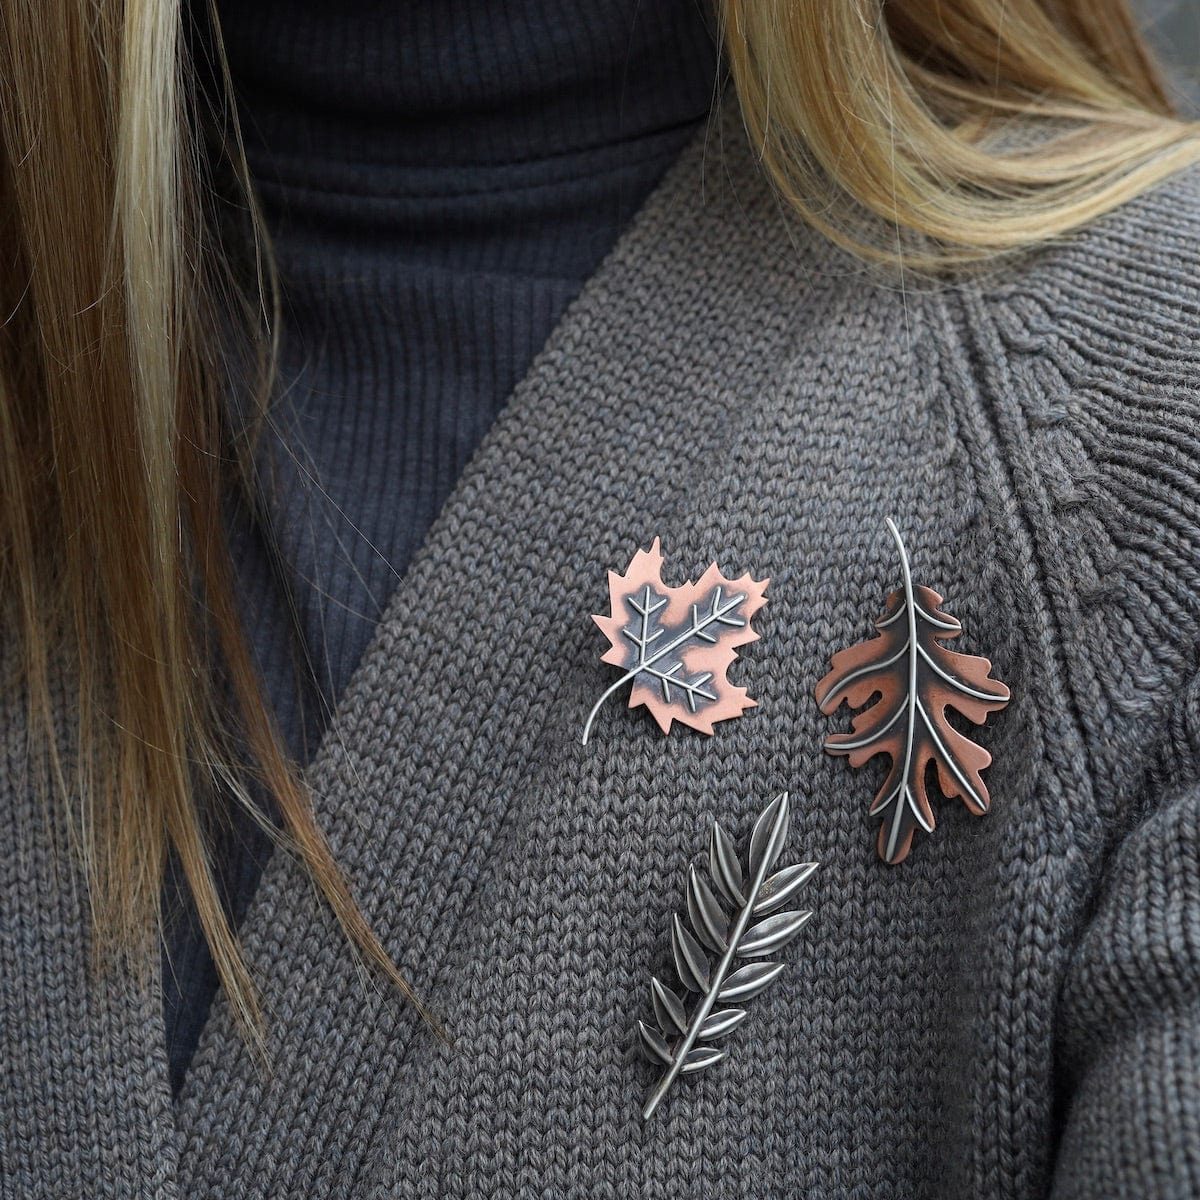 PIN Copper & Sterling Silver Small Maple Leaf Pin